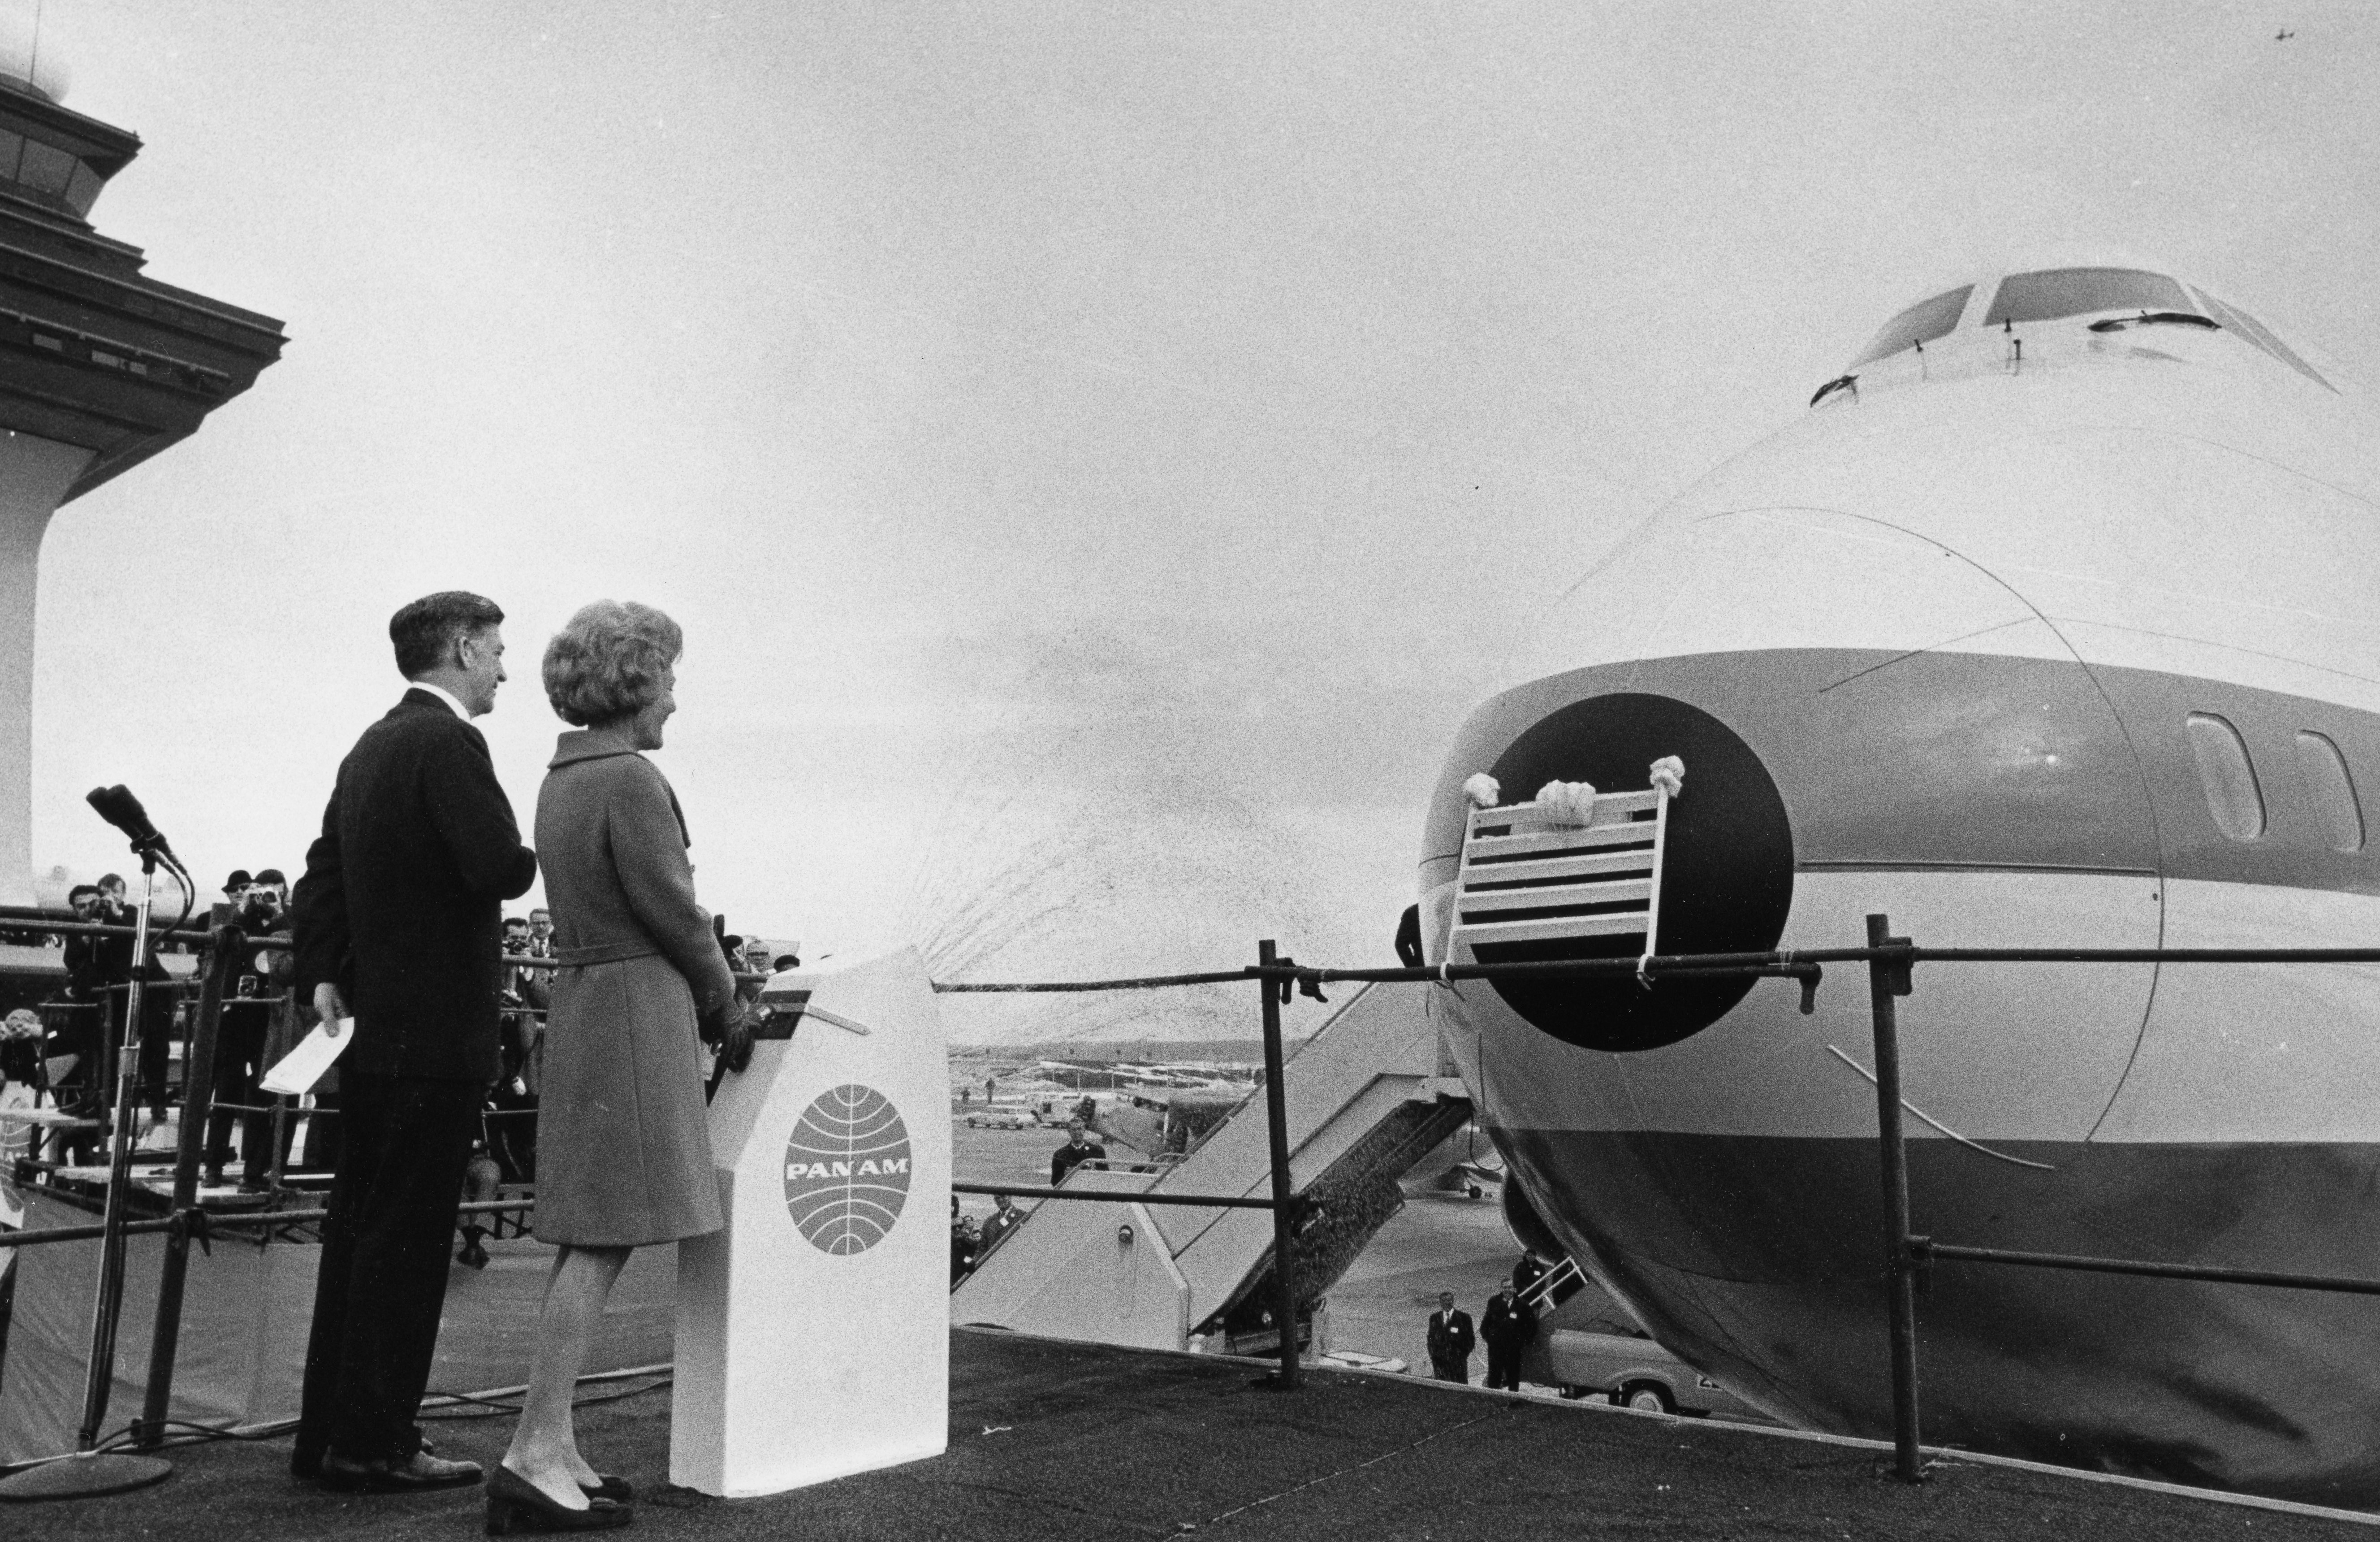 First lady Pat Nixon ushered in the era of jumbo jets by christening the first commercial 747 in 1970. Image: Wikimedia / White House Photo Office